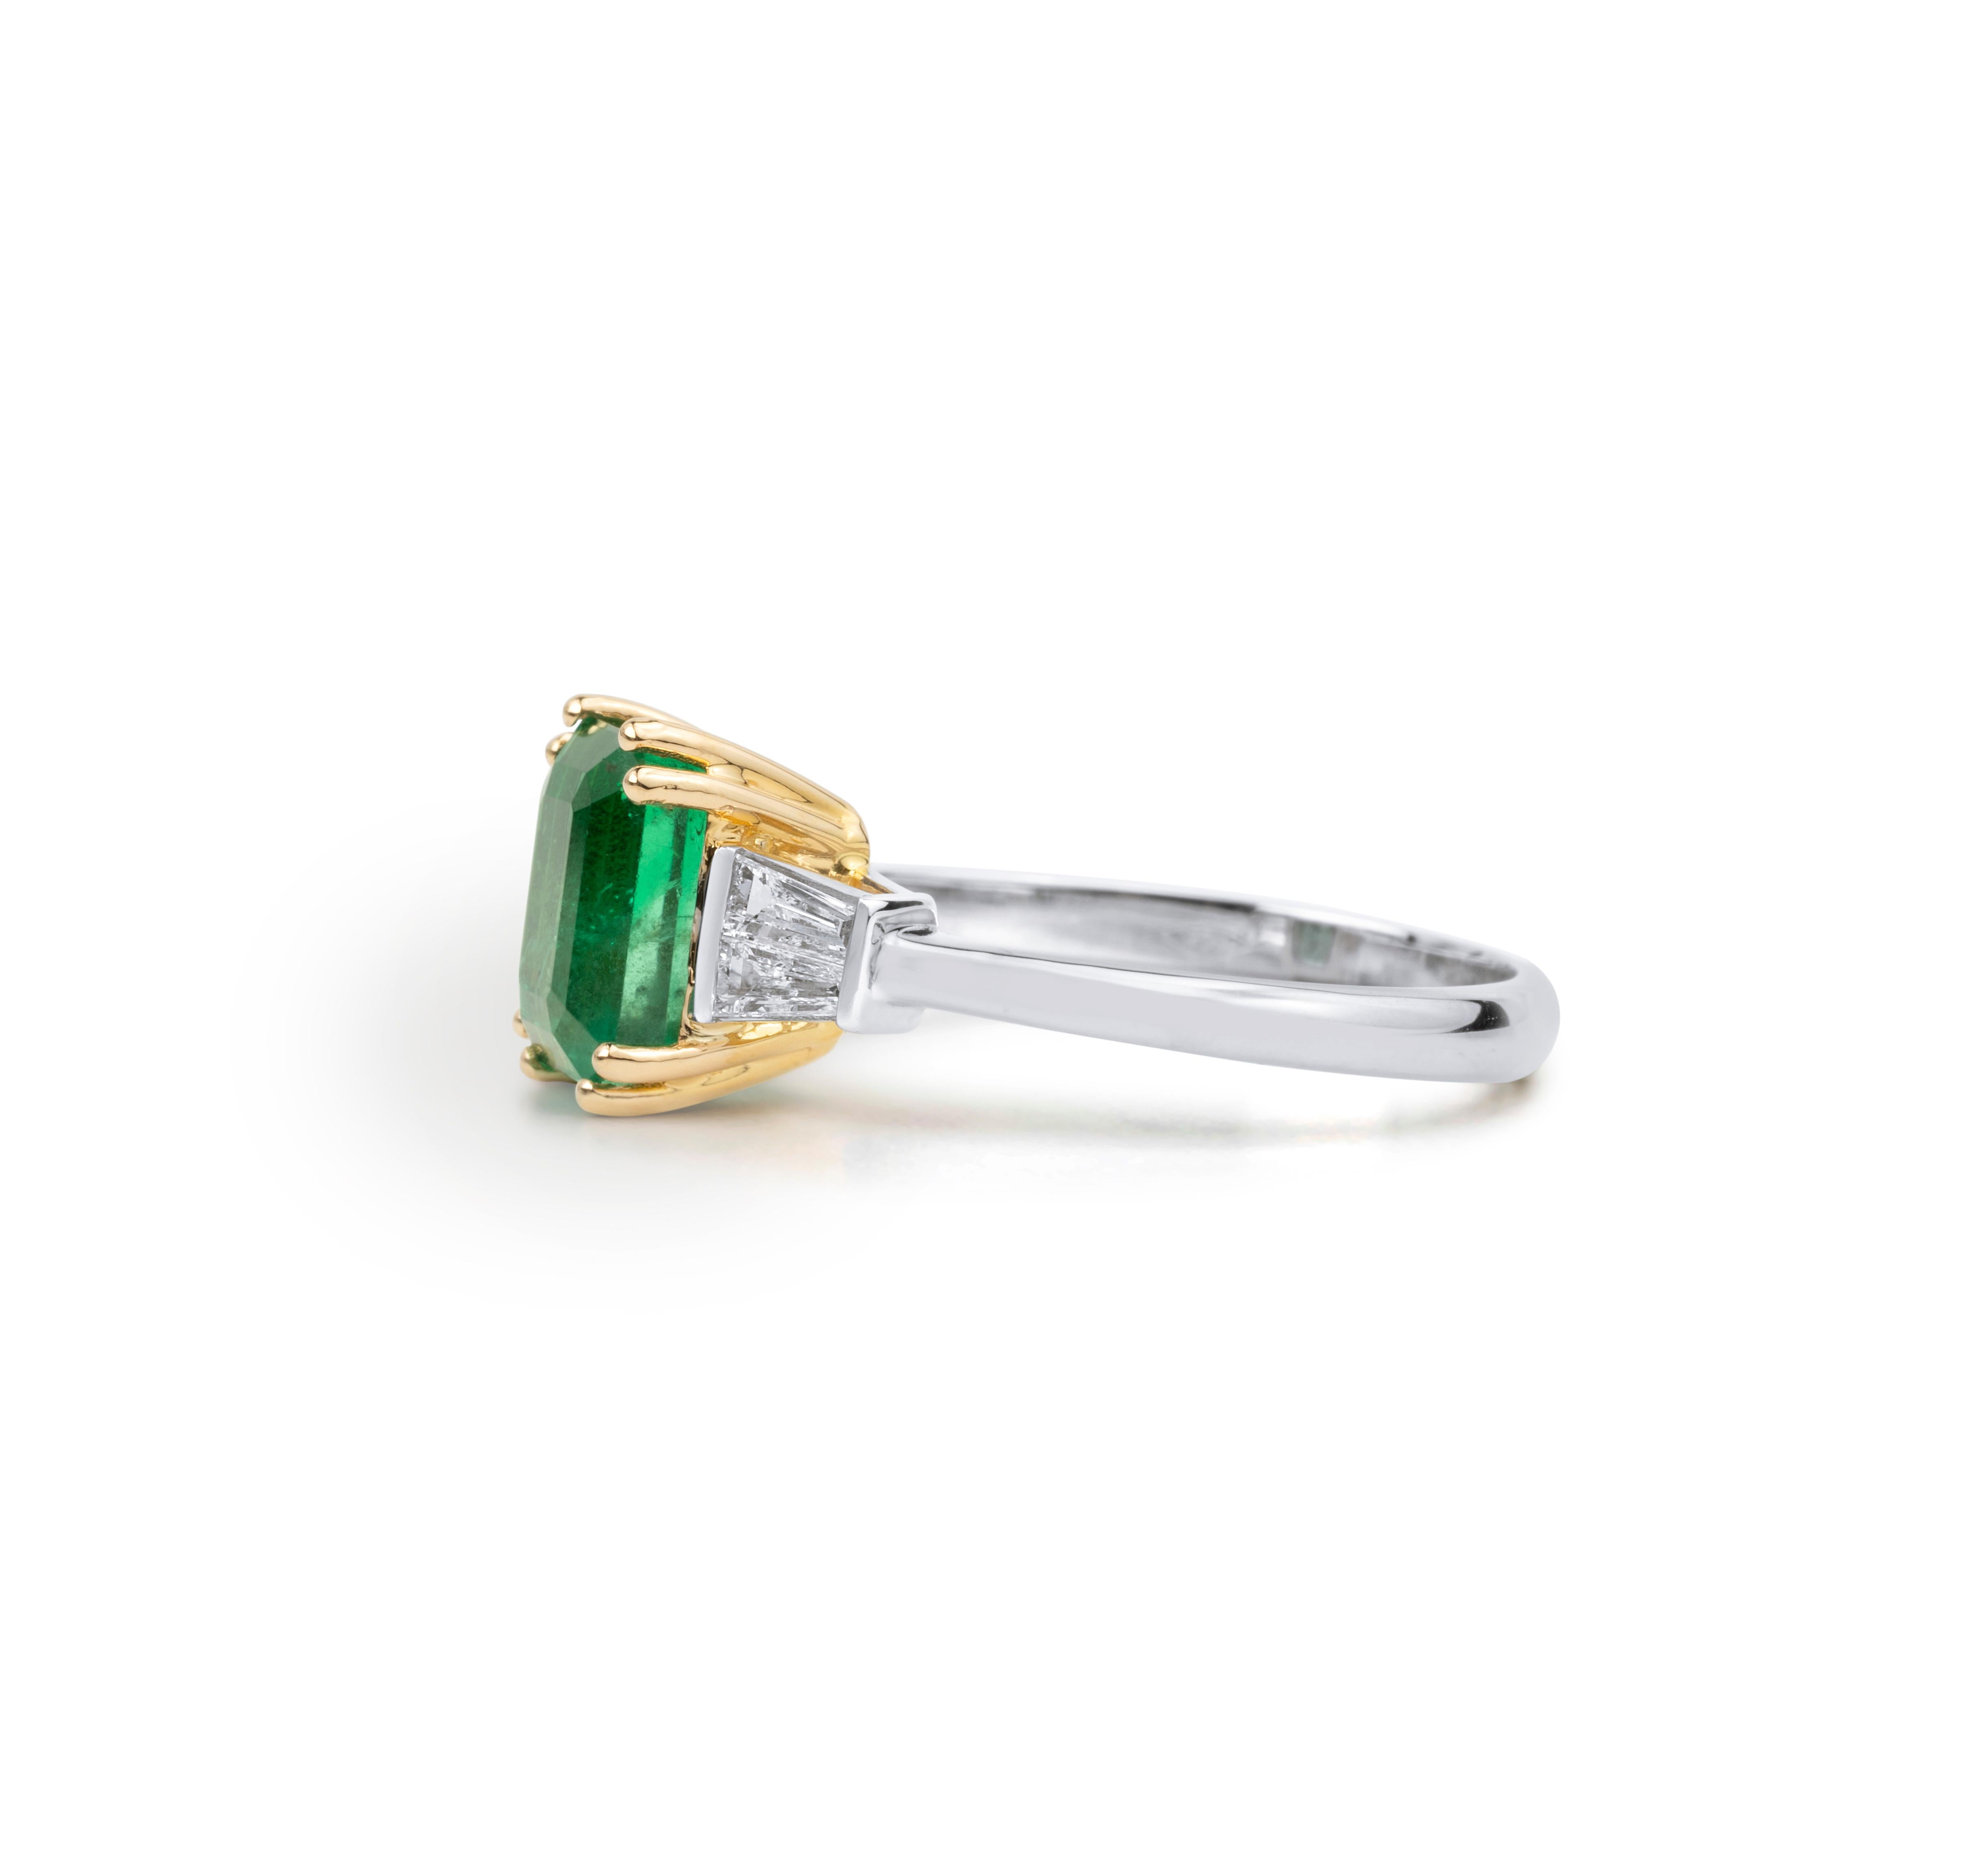 Emerald Cut 2.5 Carat Natural Emerald Diamond Cocktail Engagement Ring 18k White Gold For Sale